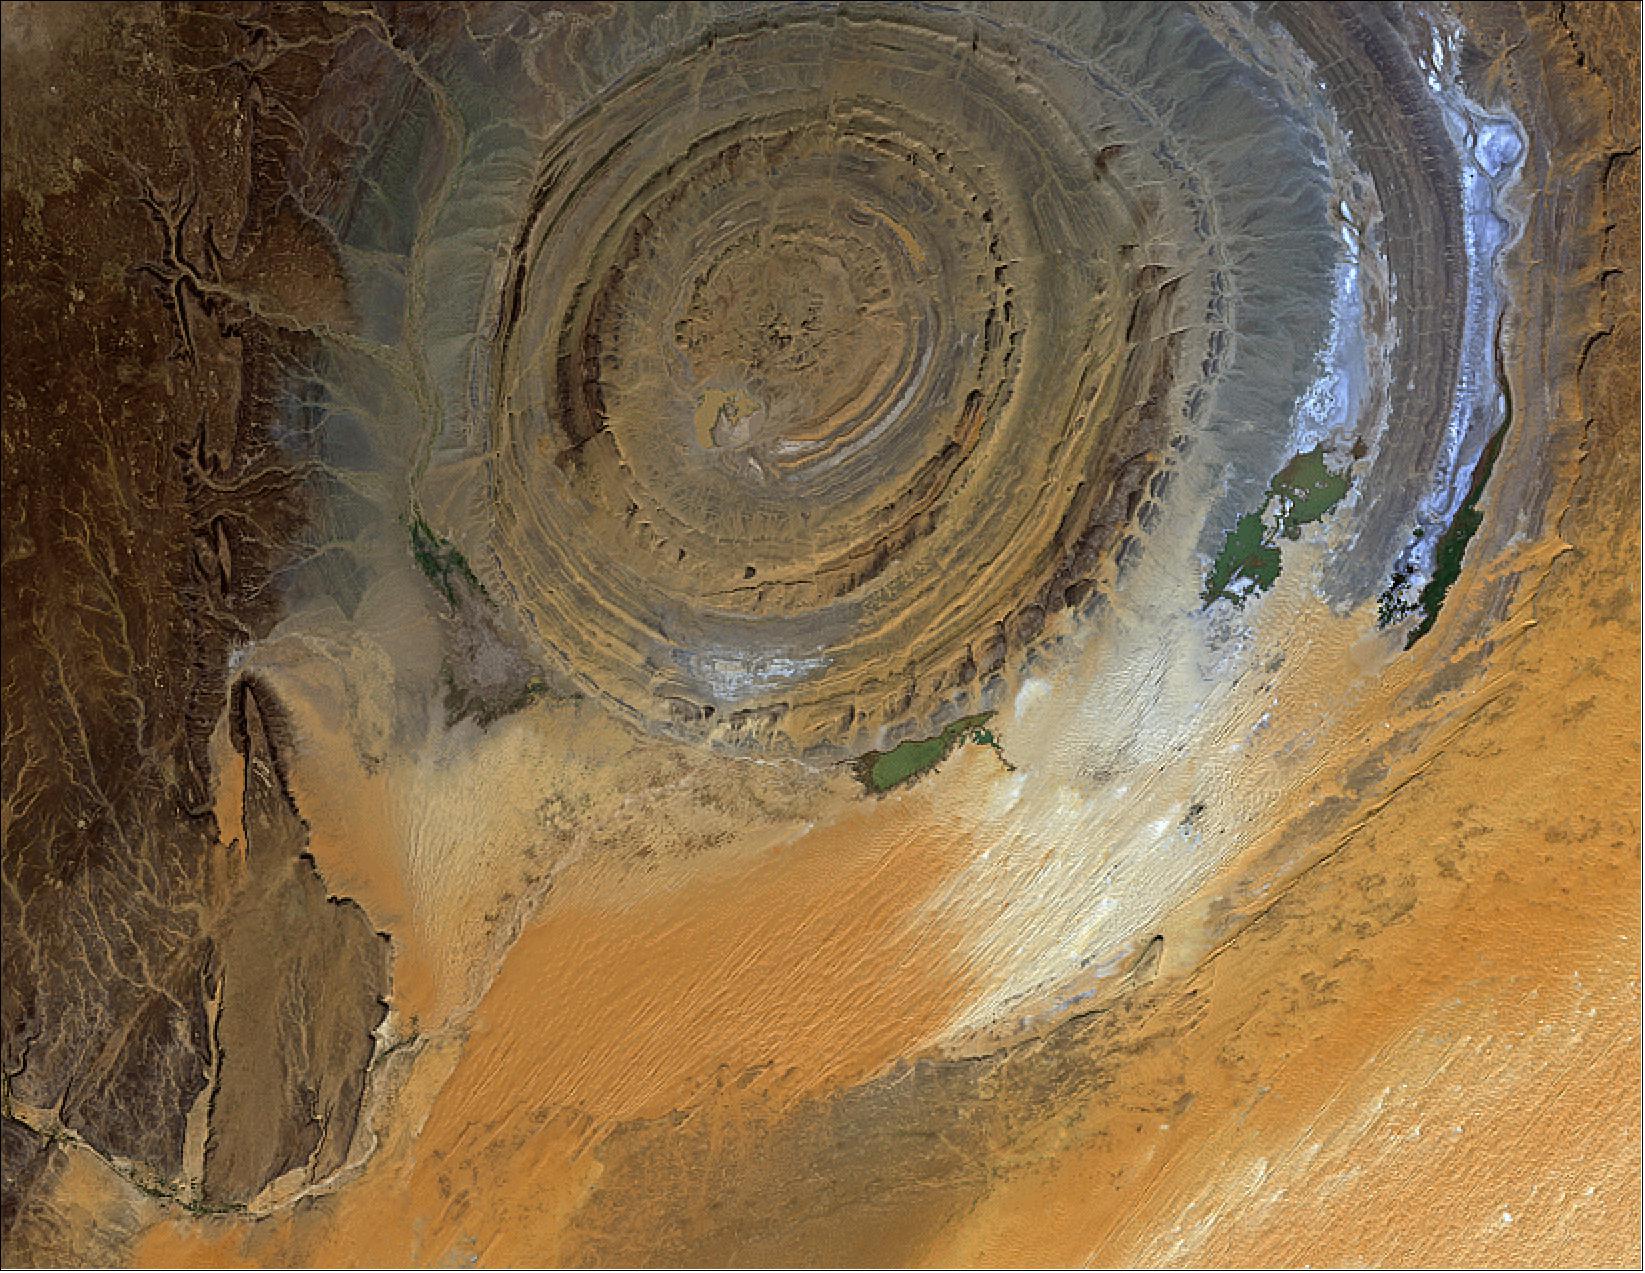 Figure 18: Richat structure in the Sahara Desert of Mauritania, acquired on Nov. 23, 2010 with the AVNIR-2 instrument on ALOS (image credit: JAXA, ESA)